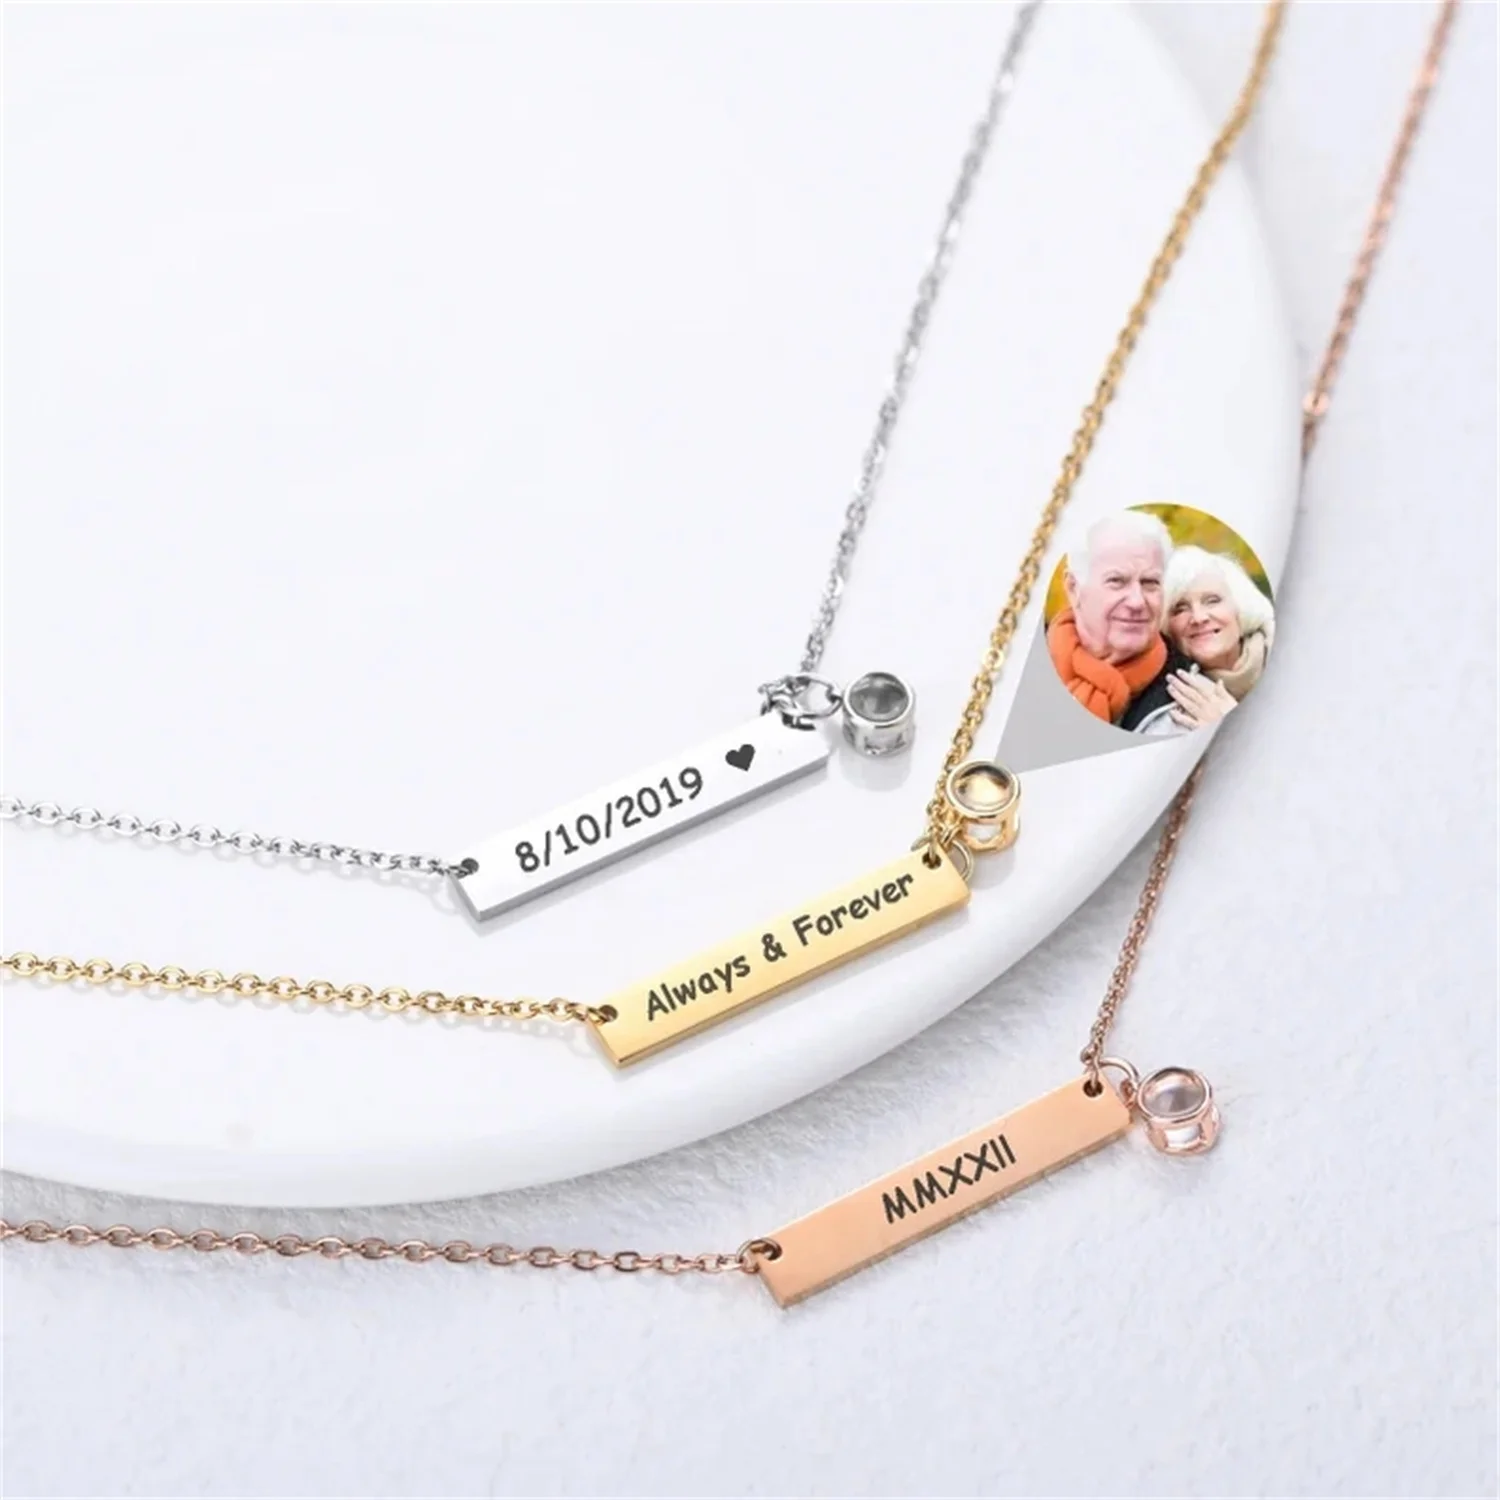 

Personalized Projection Photo Necklace Custom Bar Engraving Name Pendant Gold Plated Nameplate Memorial Jewelry Gift For Her